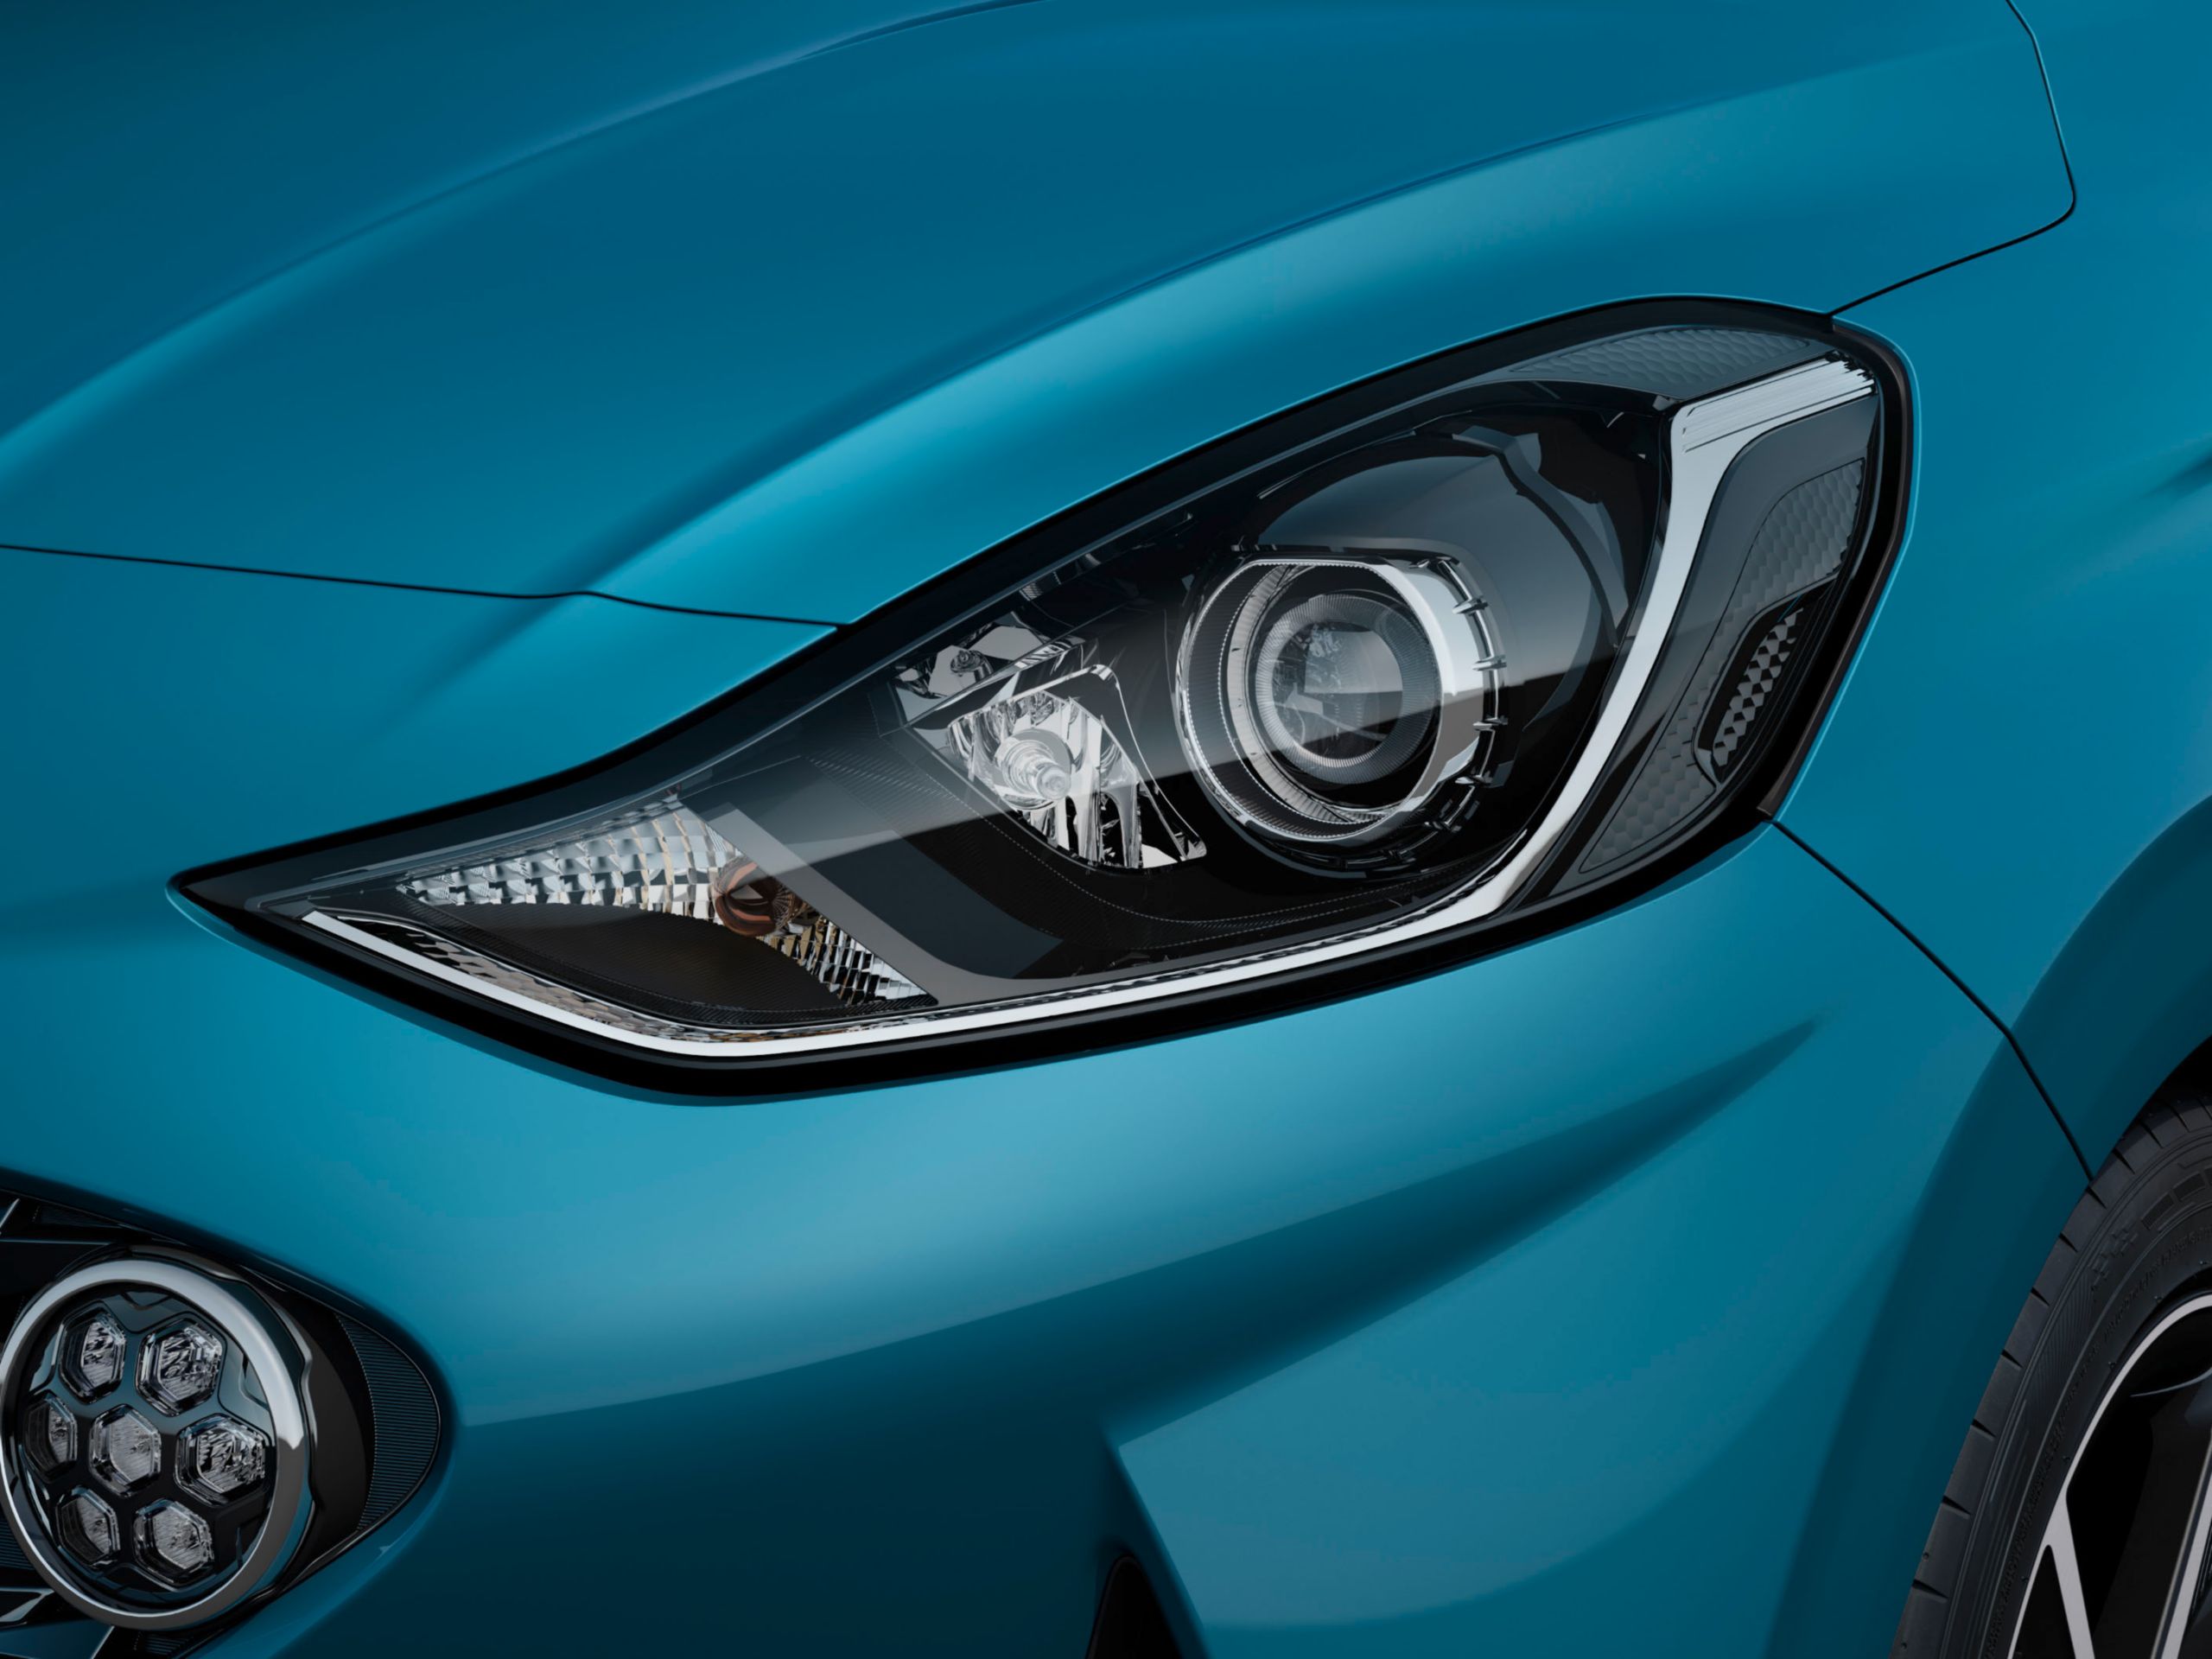 A close up look at the Hyundai i10's Bi-function projection headlamps and LED Daytime Running Lights.    